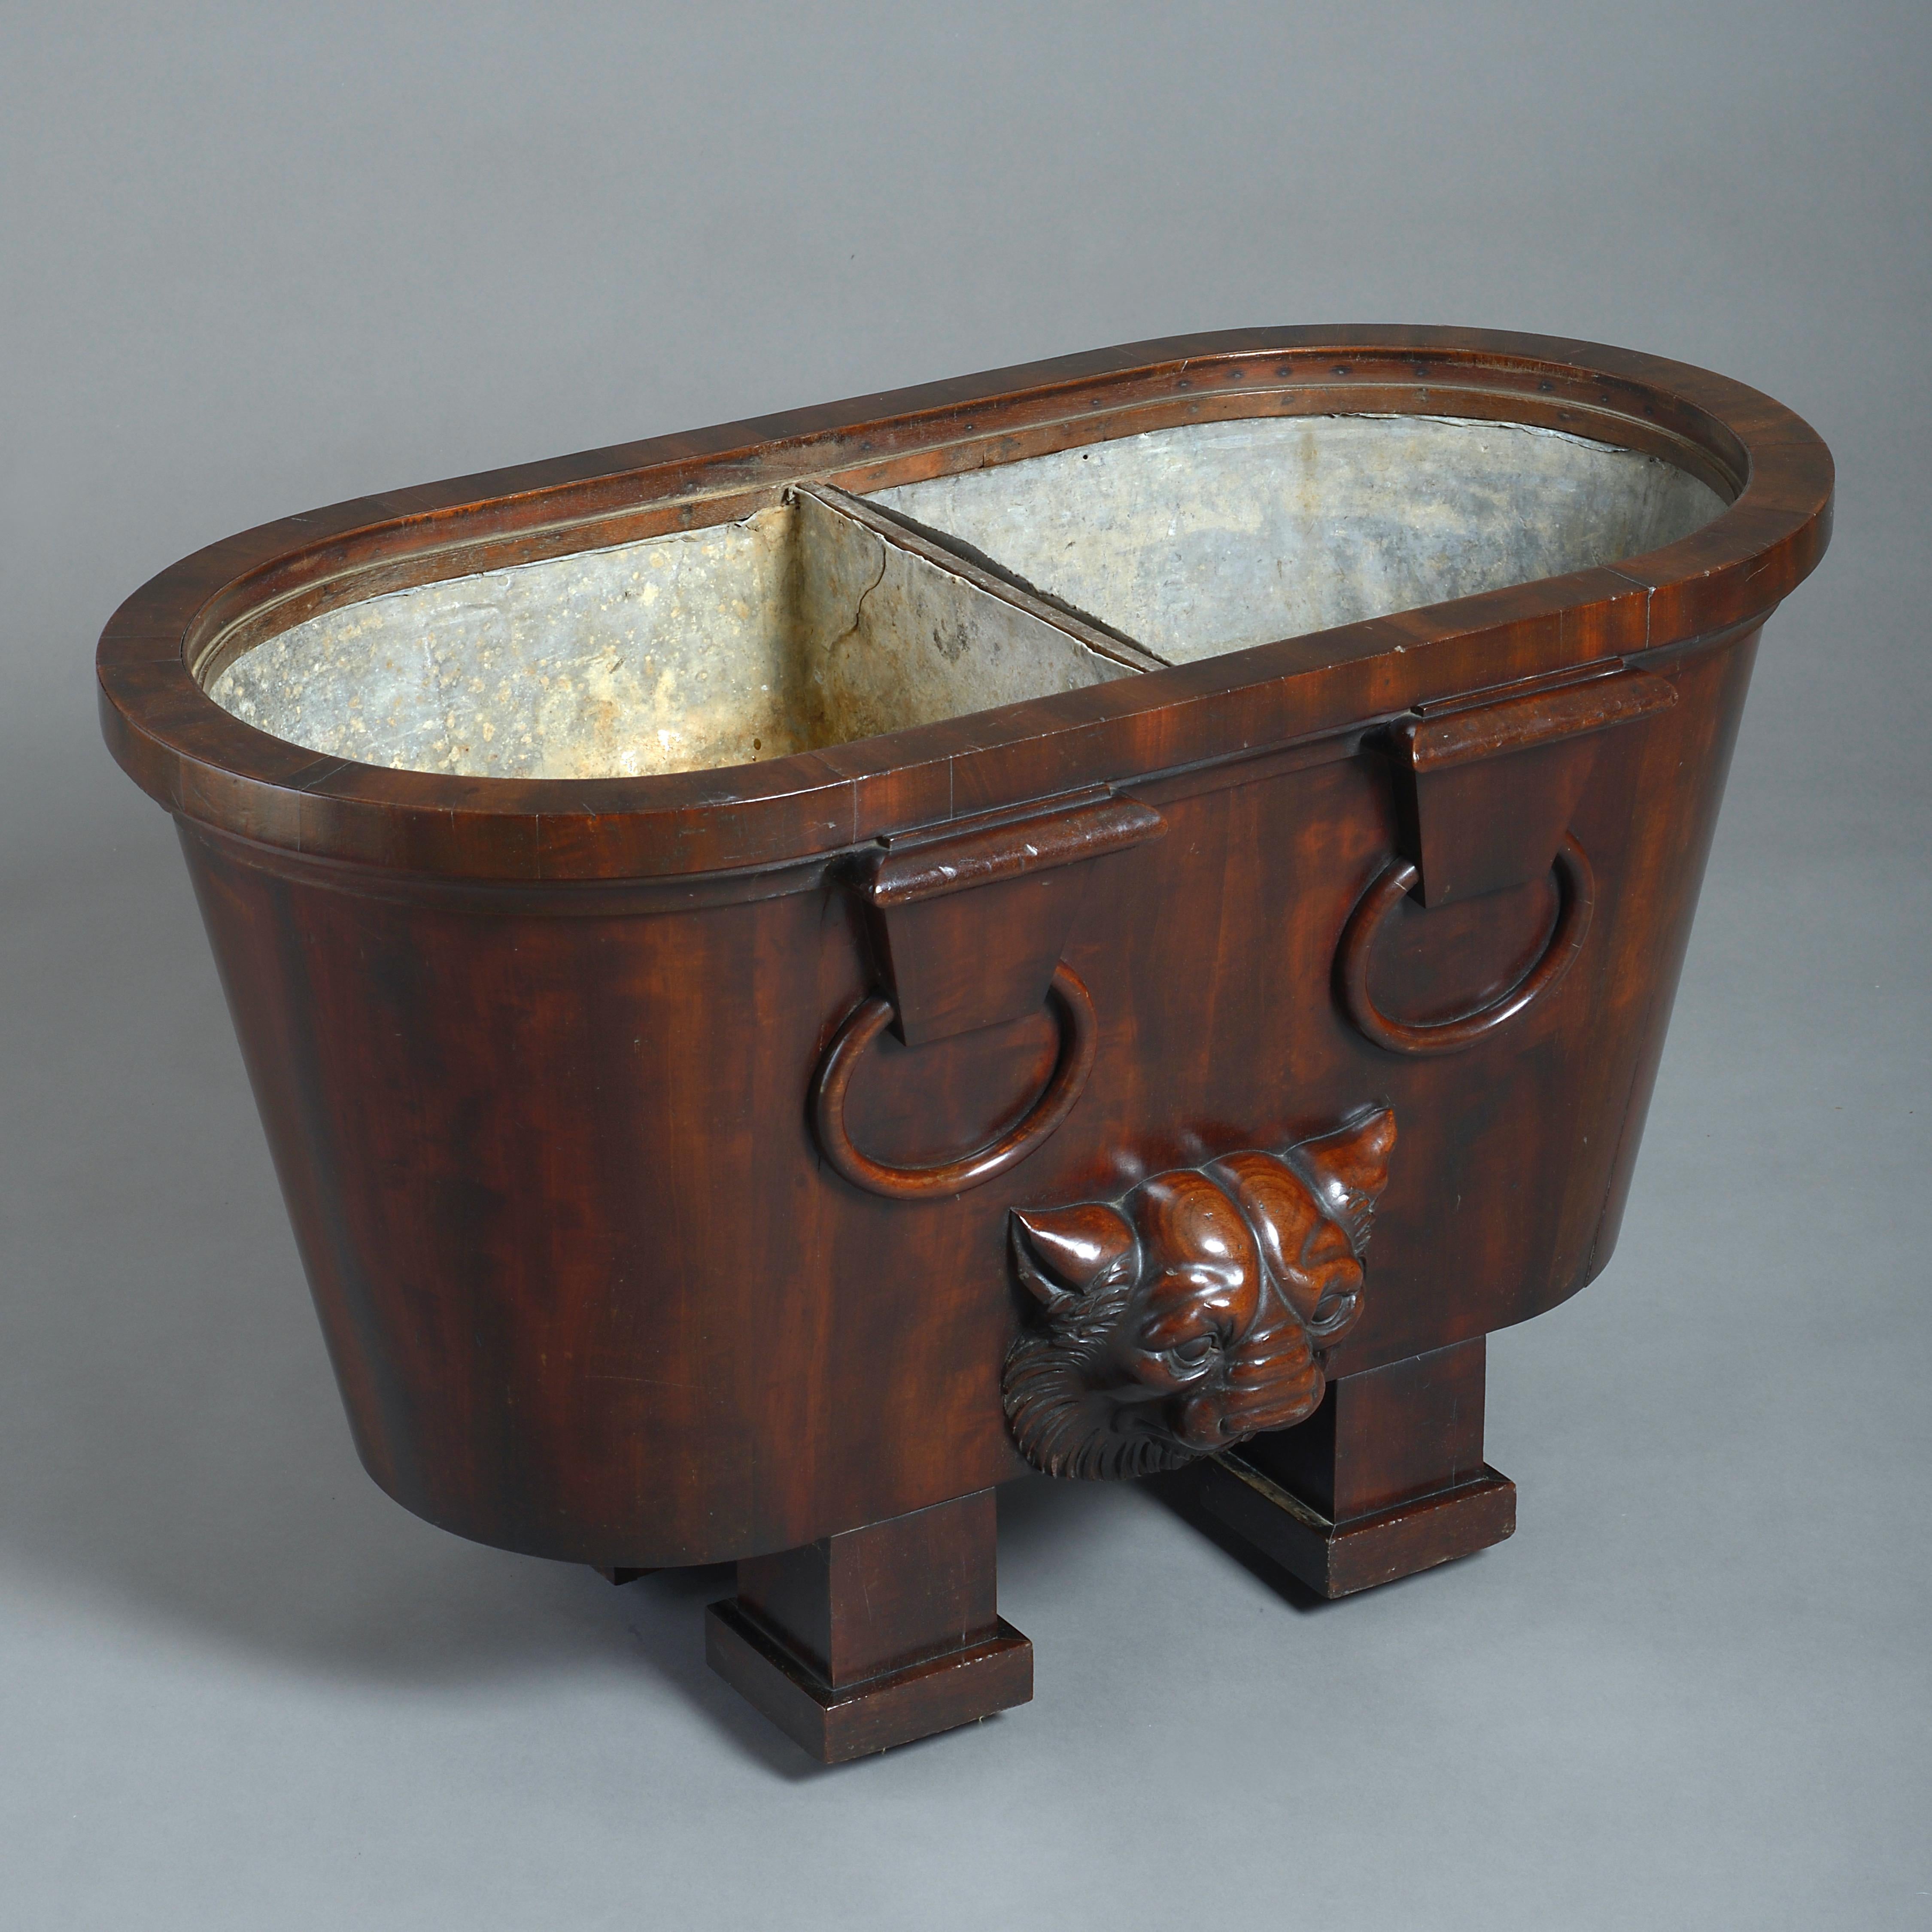 19th Century Regency Mahogany Wine-Cooler after a design by Thomas Hope For Sale